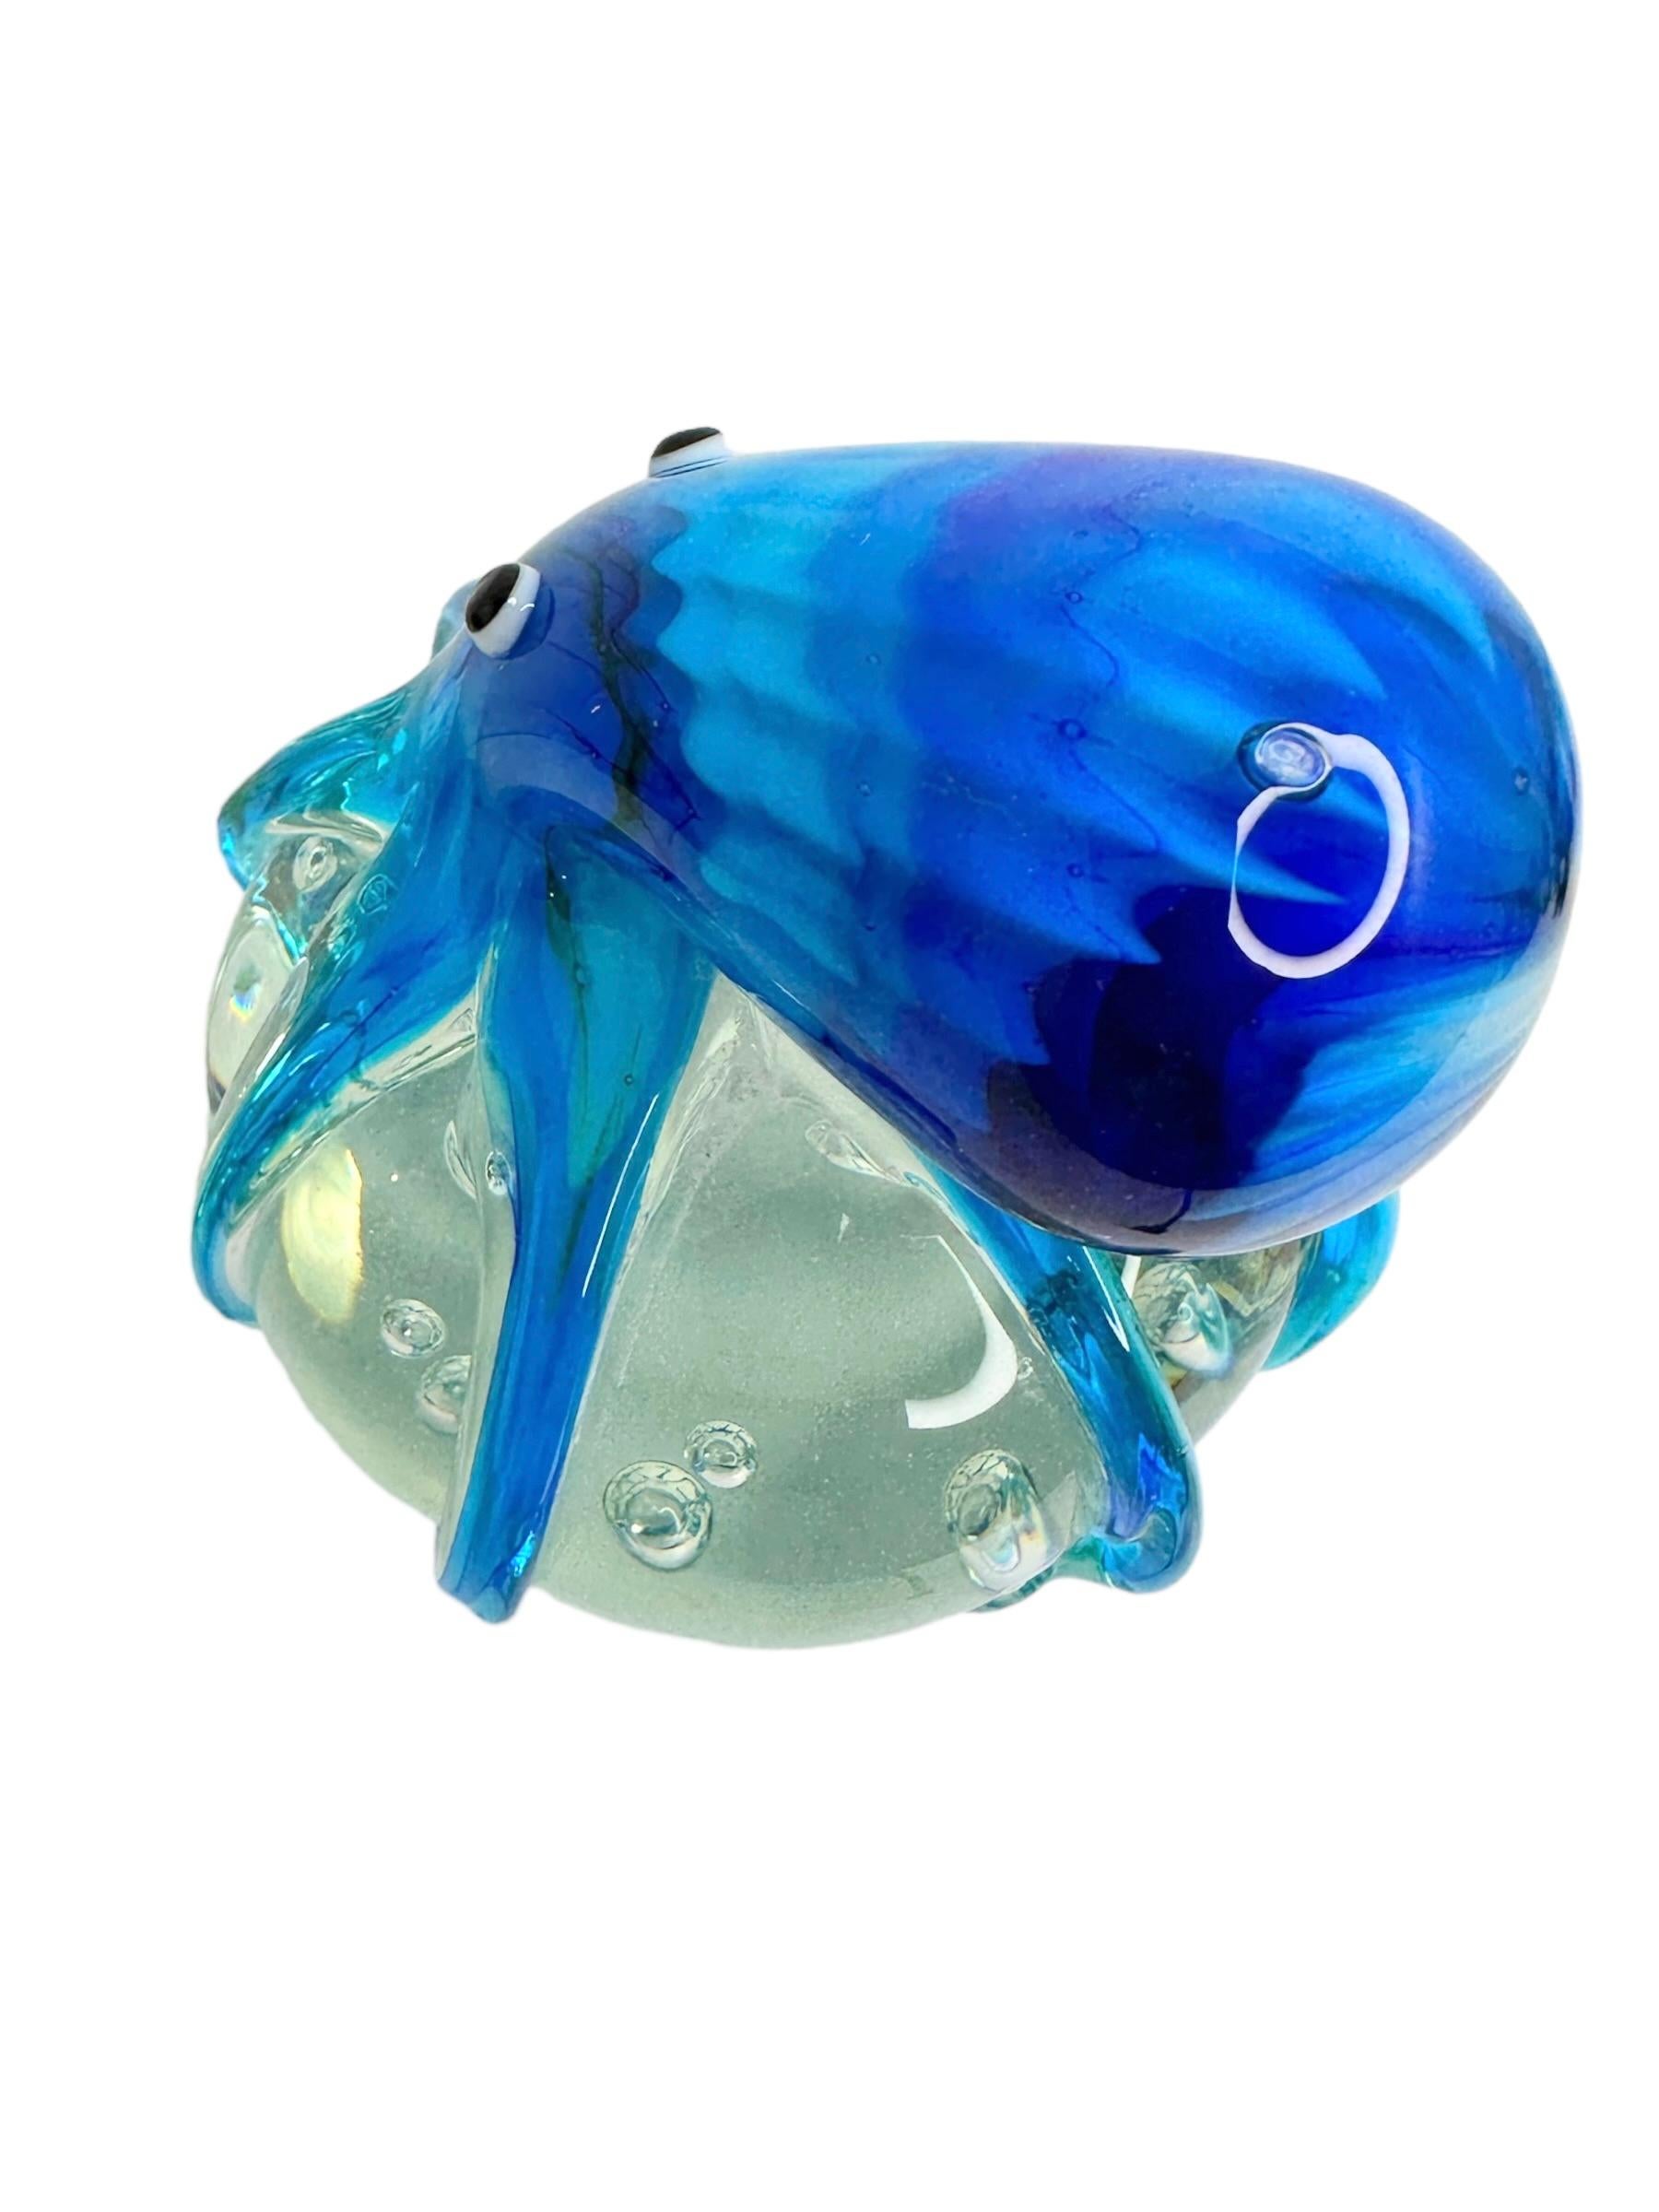 Gorgeous Murano Italian Art Glass giant octopus Paperweight, Italy, 1980s For Sale 1